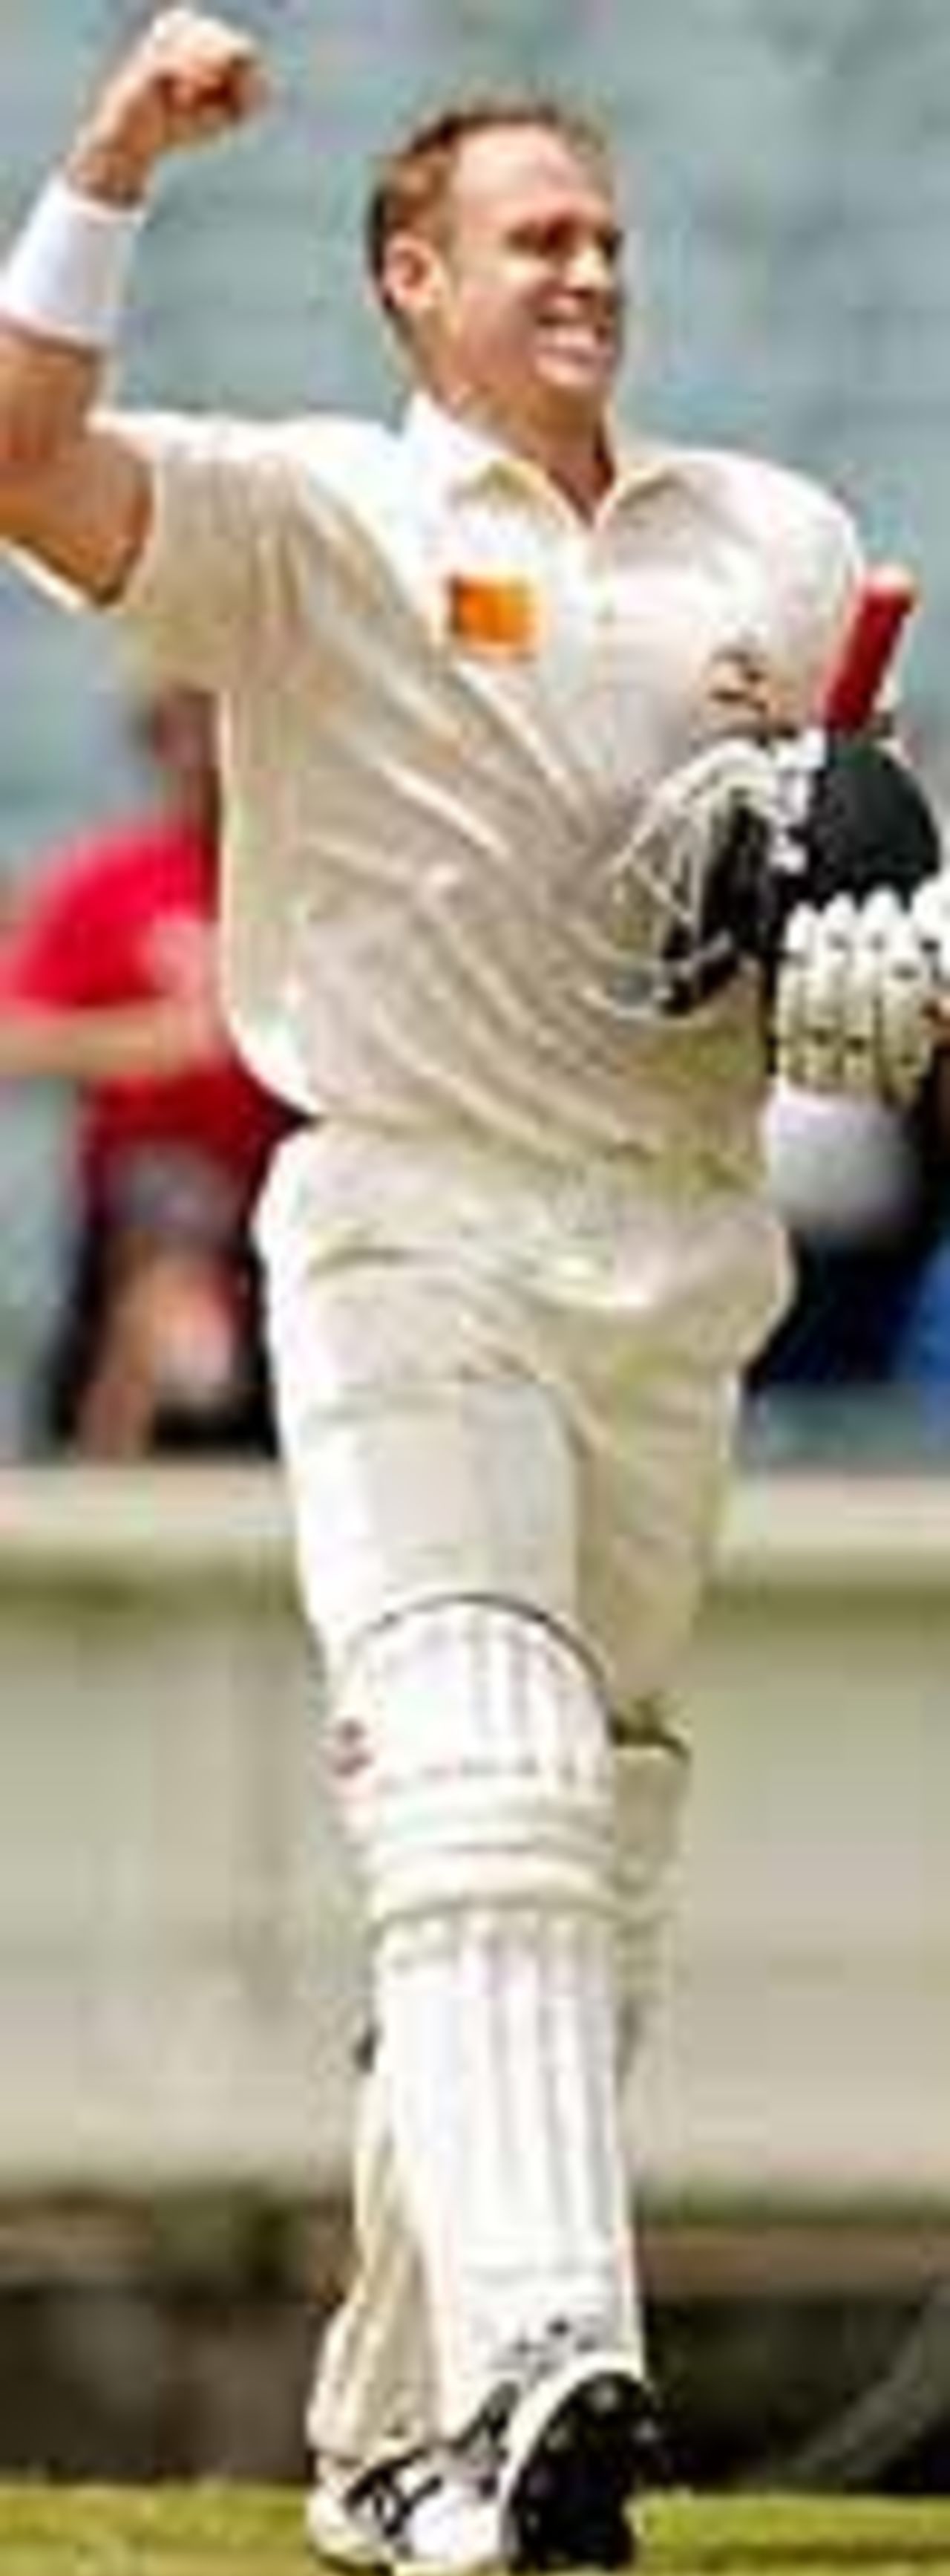 28 Dec 2001: Matthew Hayden from Australia celebrates after making a century, during the 3rd day of the Boxing Day Test match between Australia and South Africa at the Melbourne Cricket Ground in Melbourne, Australia.